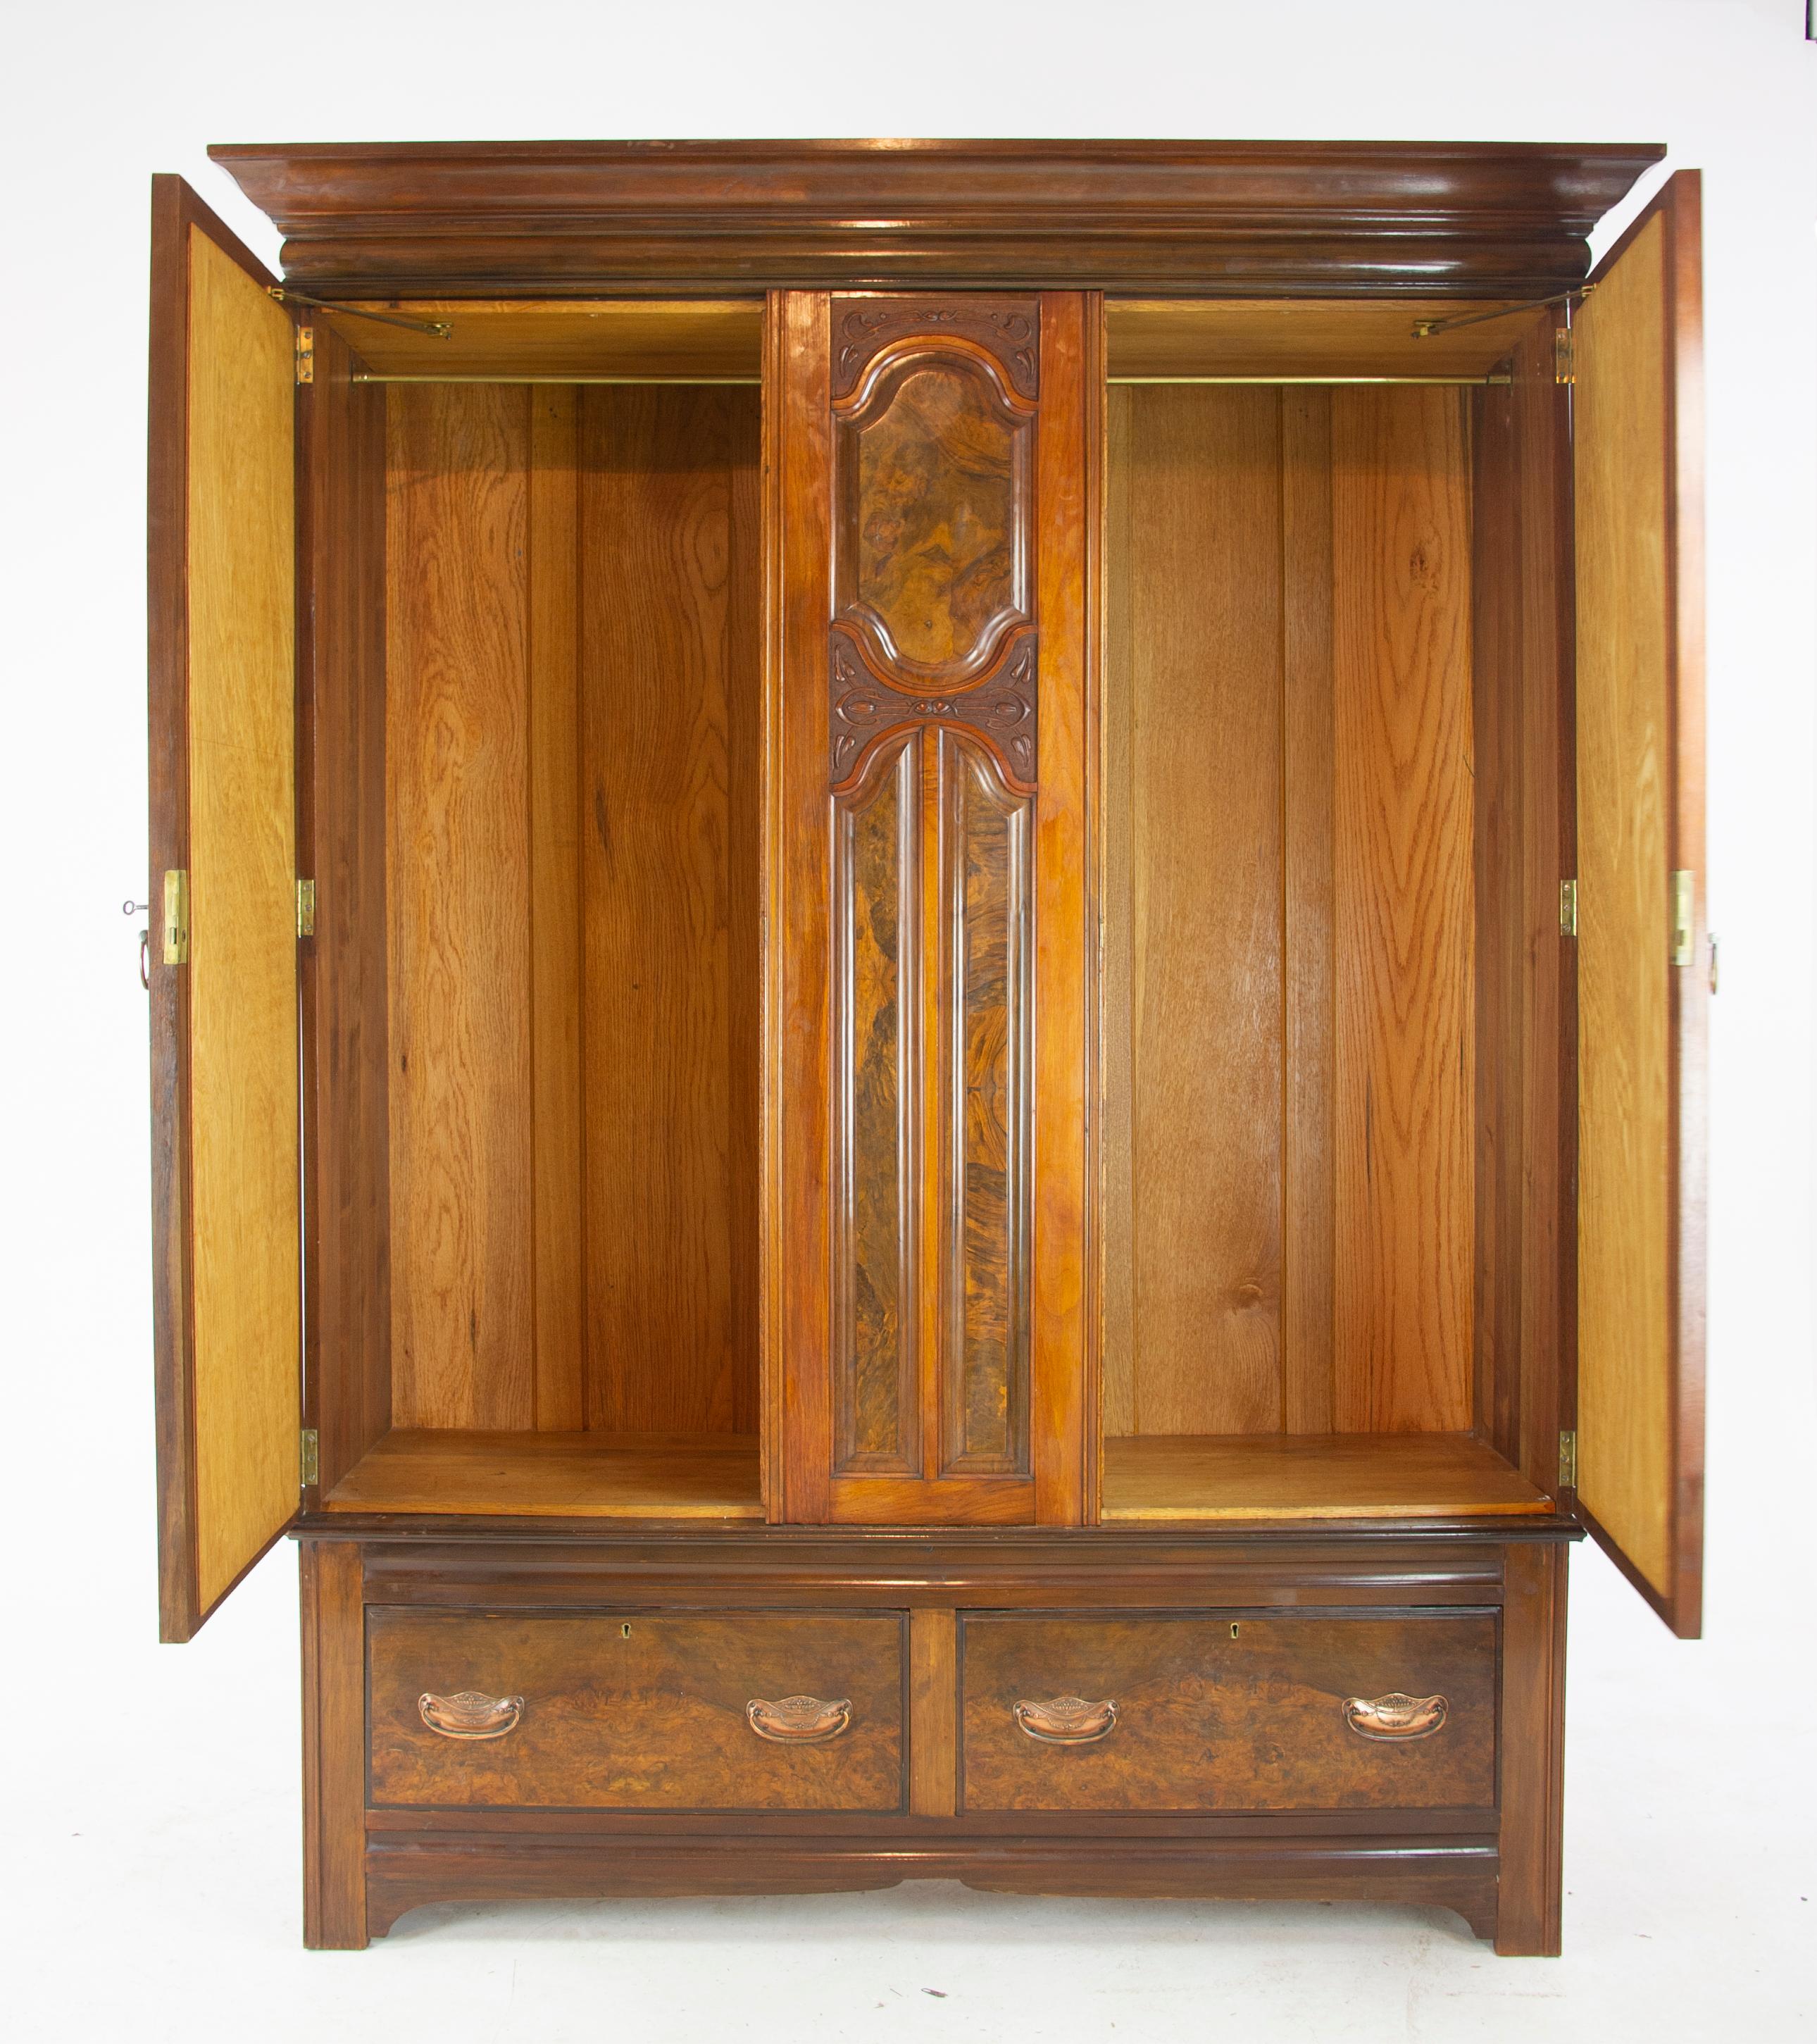 Antique walnut armoire, three-door armoire, vintage wardrobe, Scotland 1895, Antique Furniture, B1184

Scotland 1895
Solid walnut and veneers
Original finish
Cornice above
Pair of shaped beveled mirrors
Open to reveal hanging